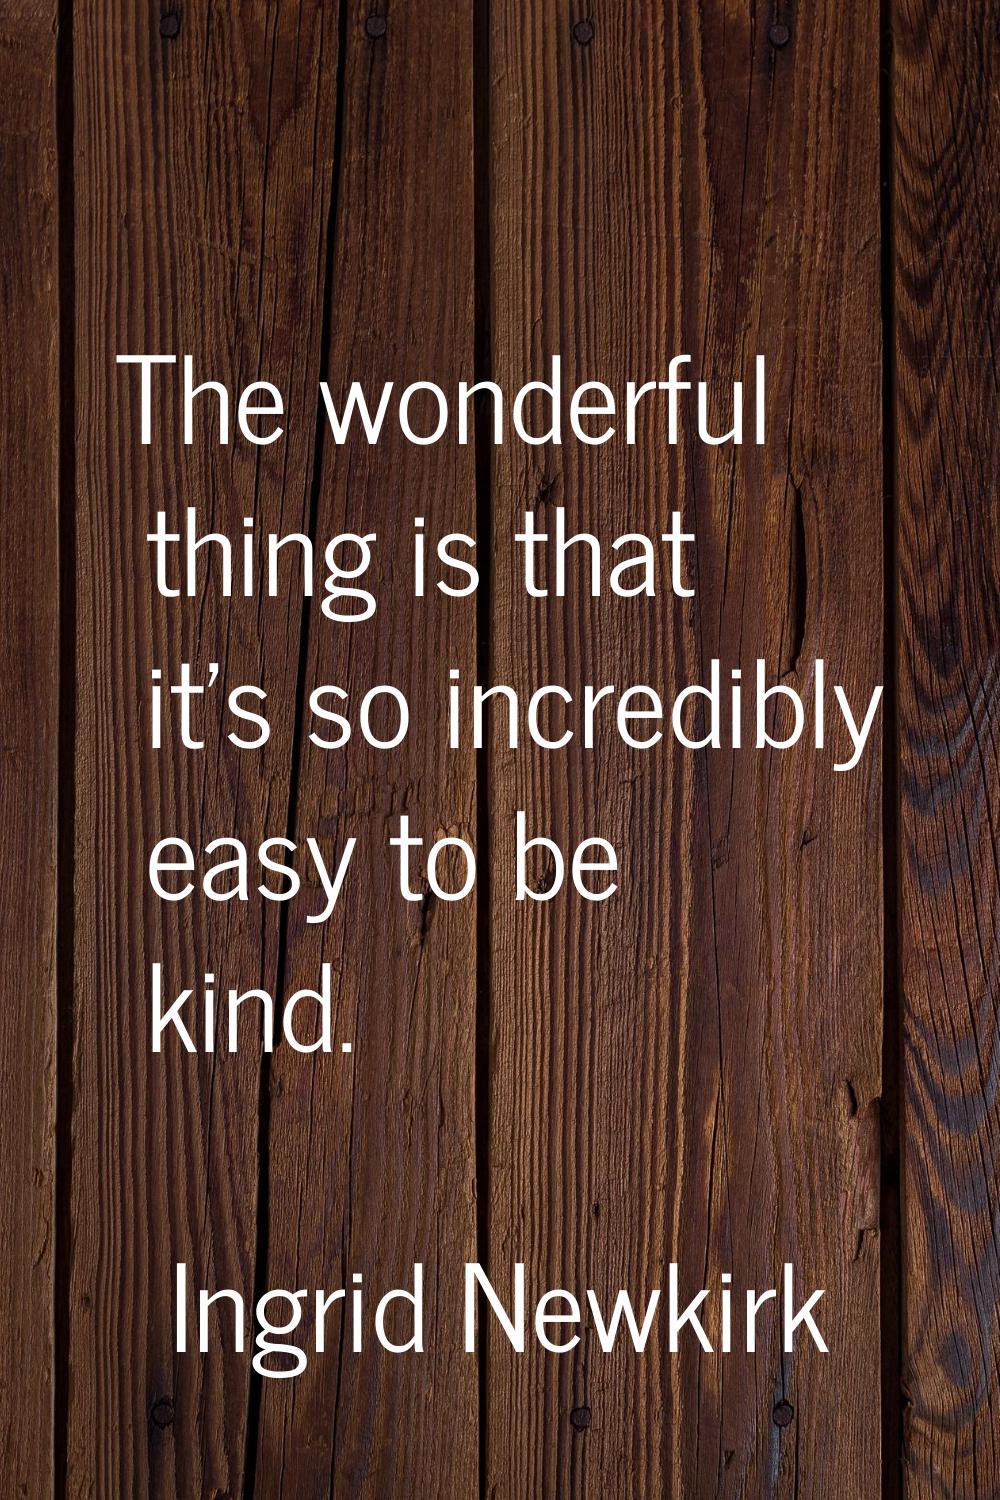 The wonderful thing is that it's so incredibly easy to be kind.